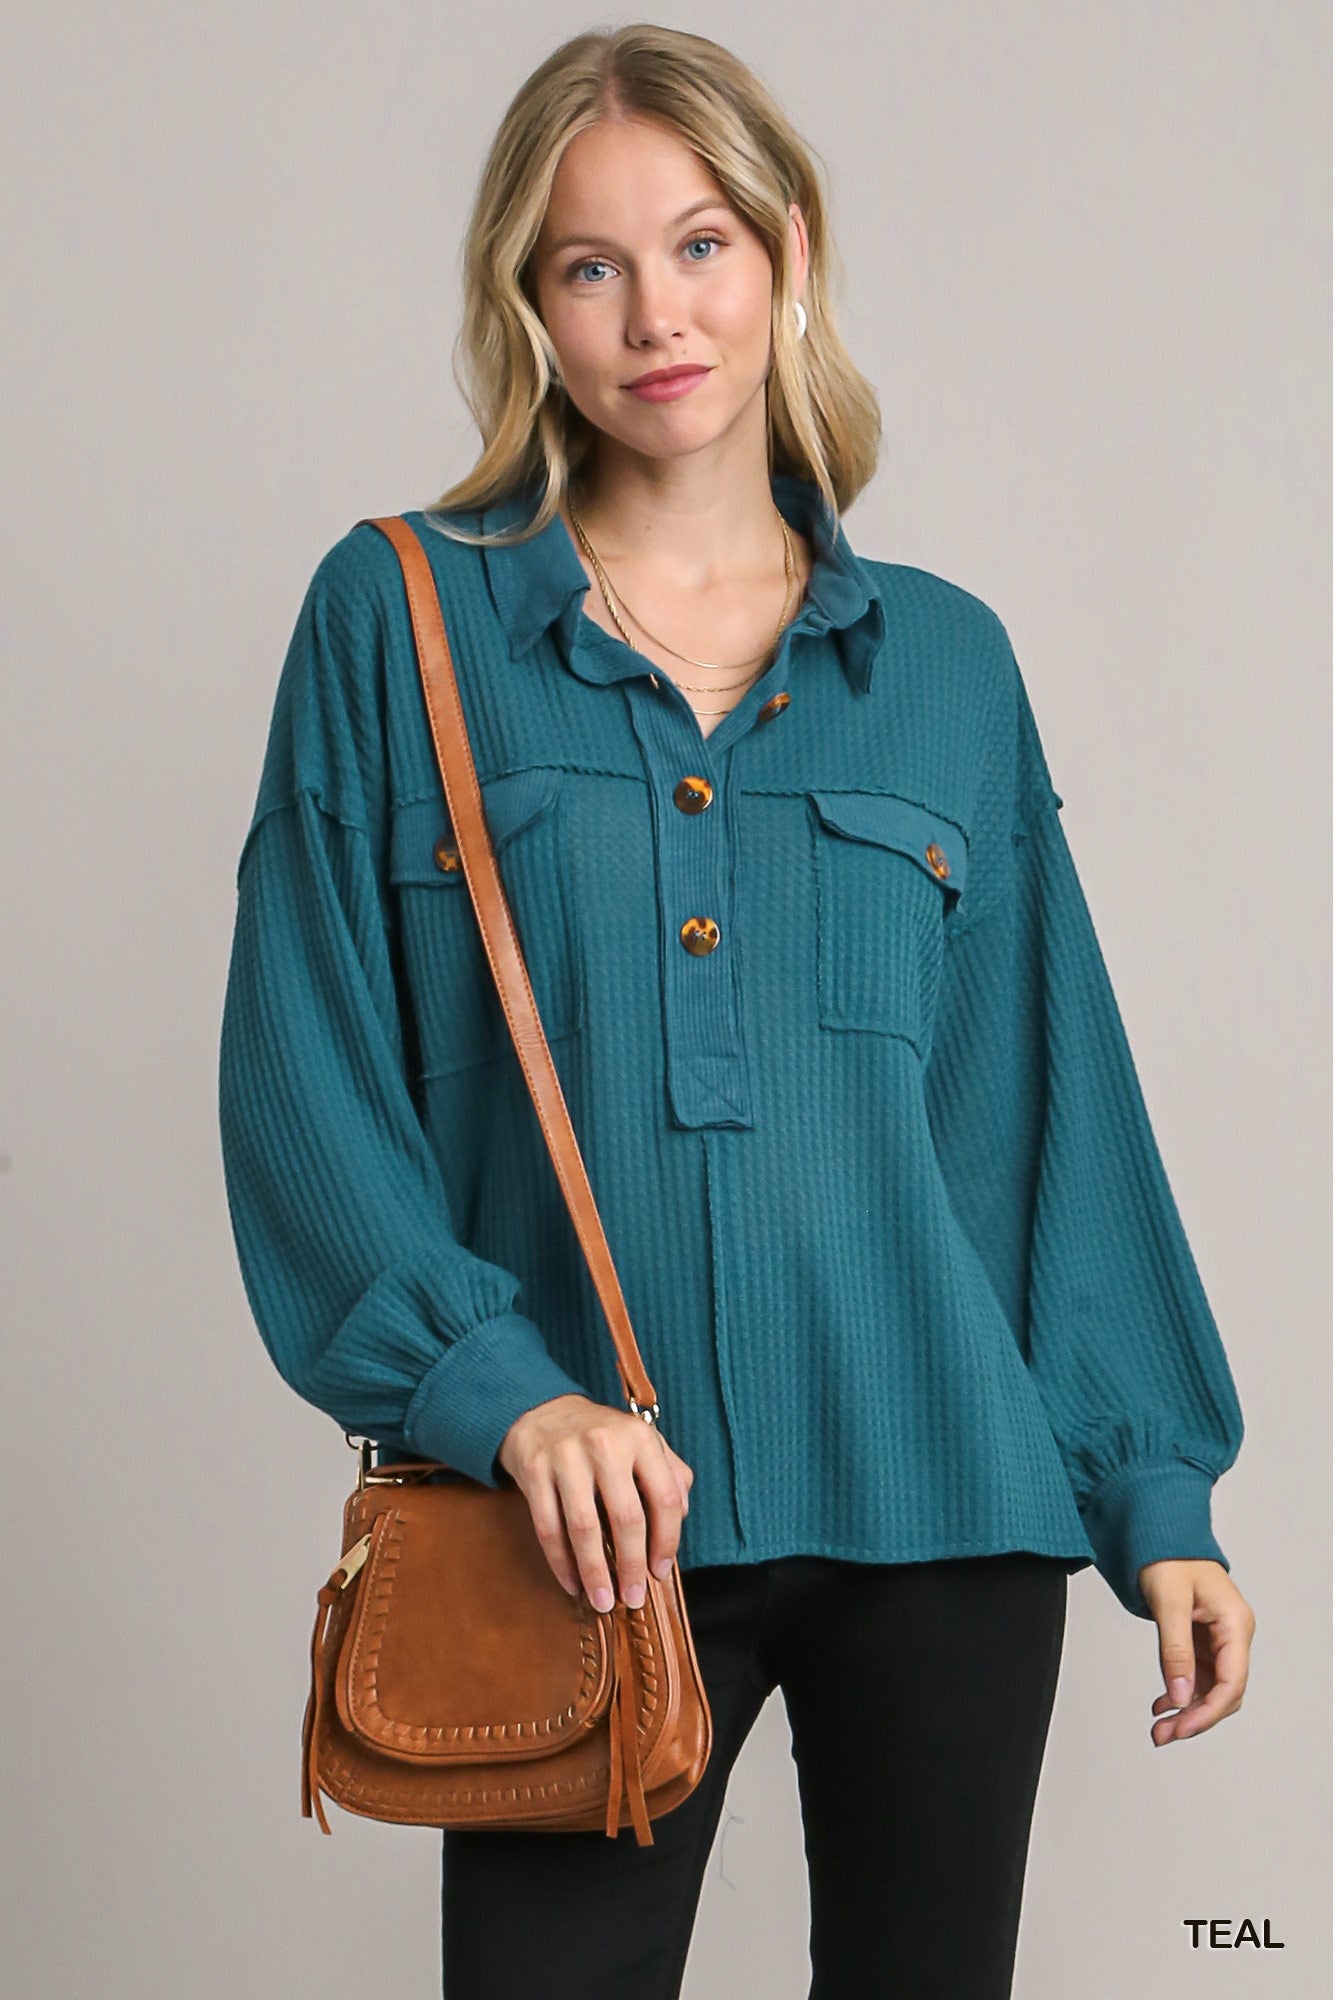 Umgee Waffle and Fleece Rib Contrast with Buttons Top - Roulhac Fashion Boutique